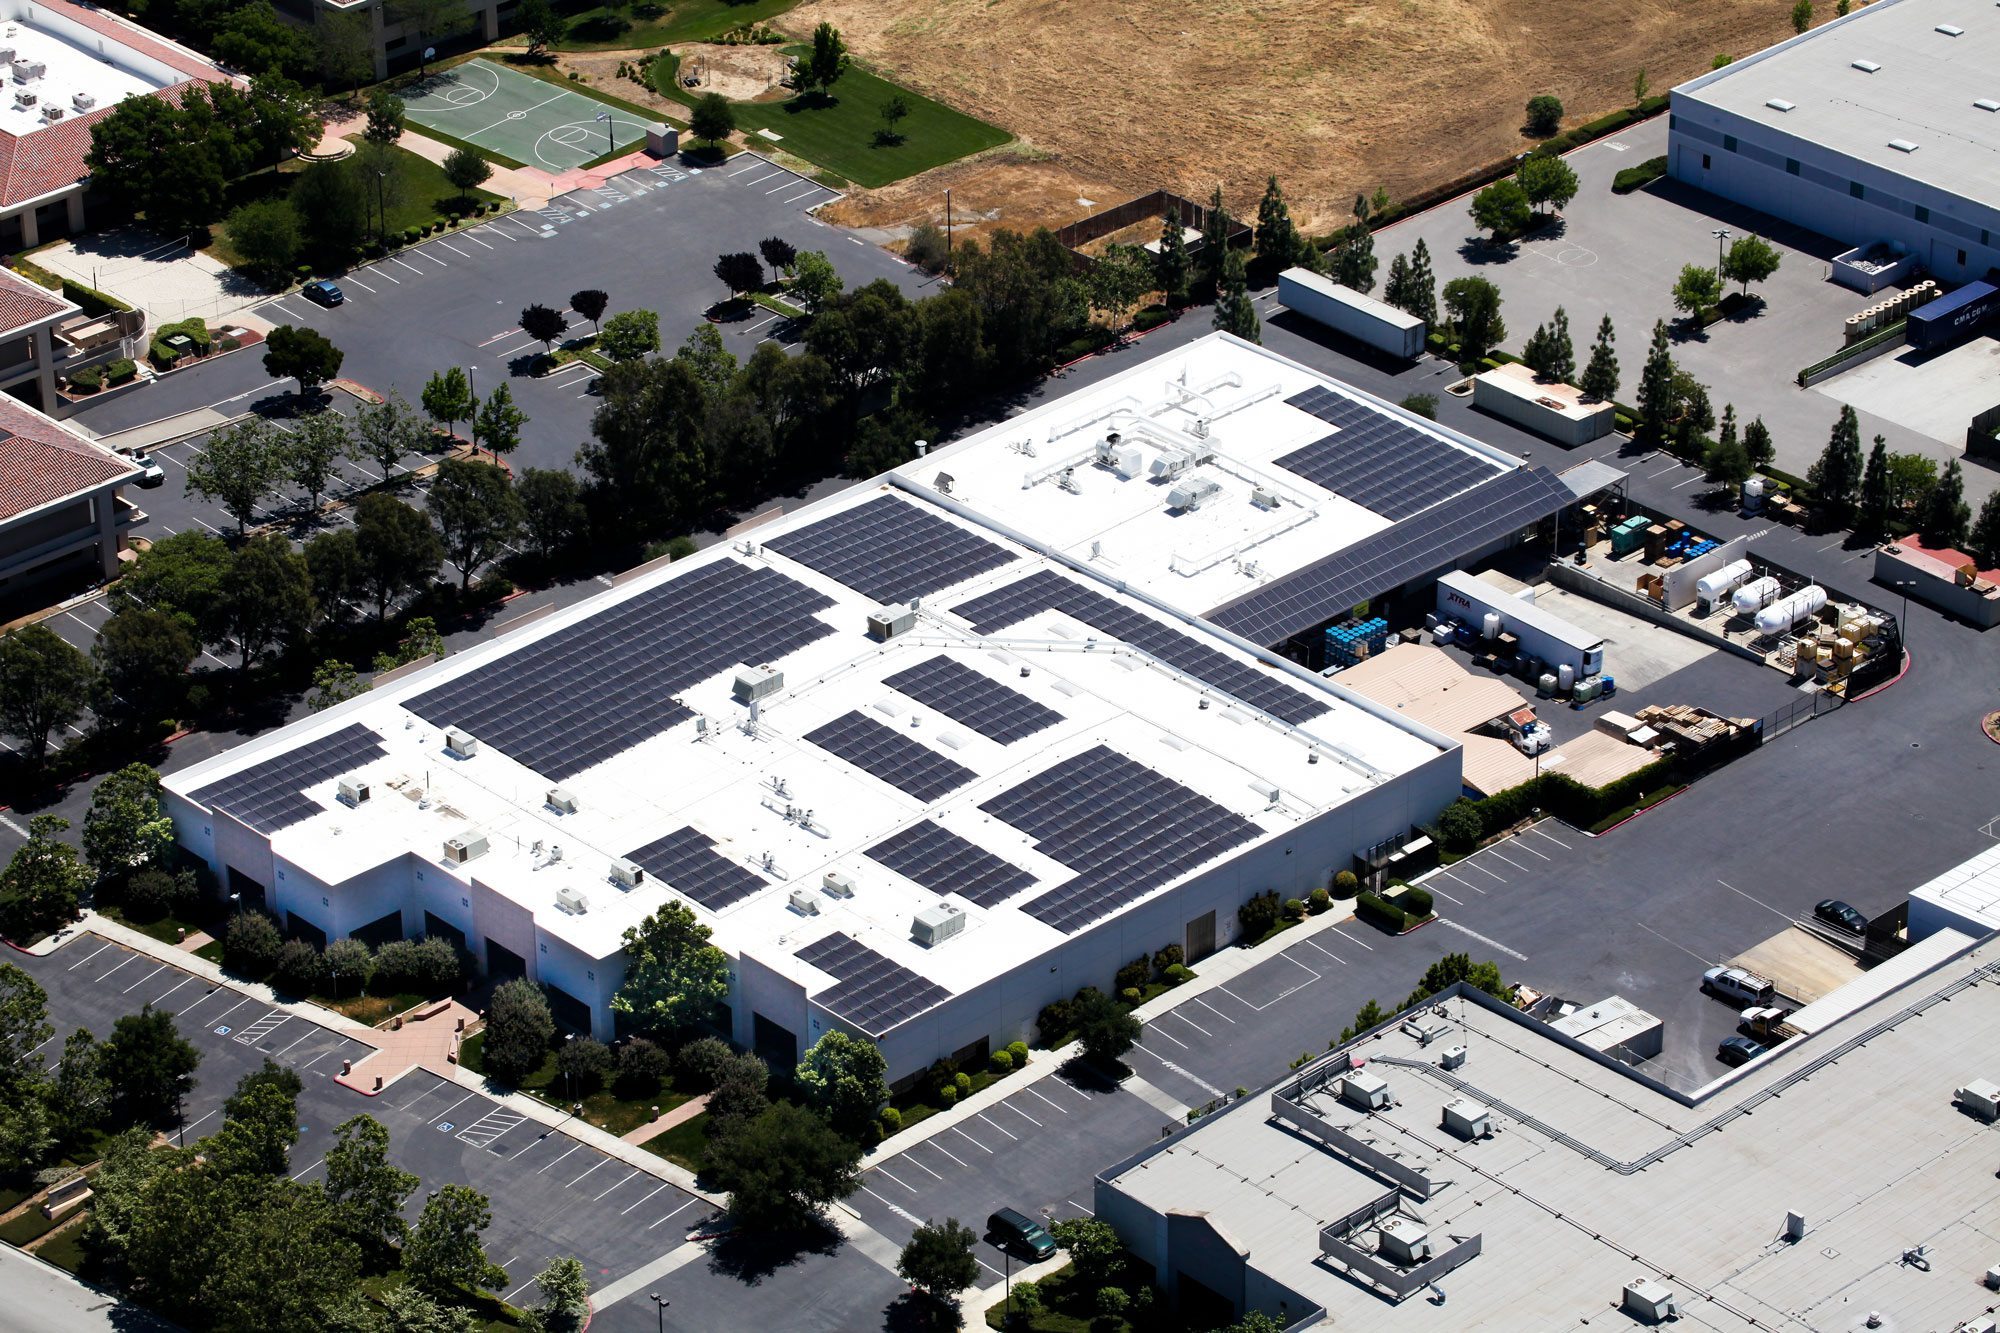 Aerial view of California commercial building with rooftop solar panels.